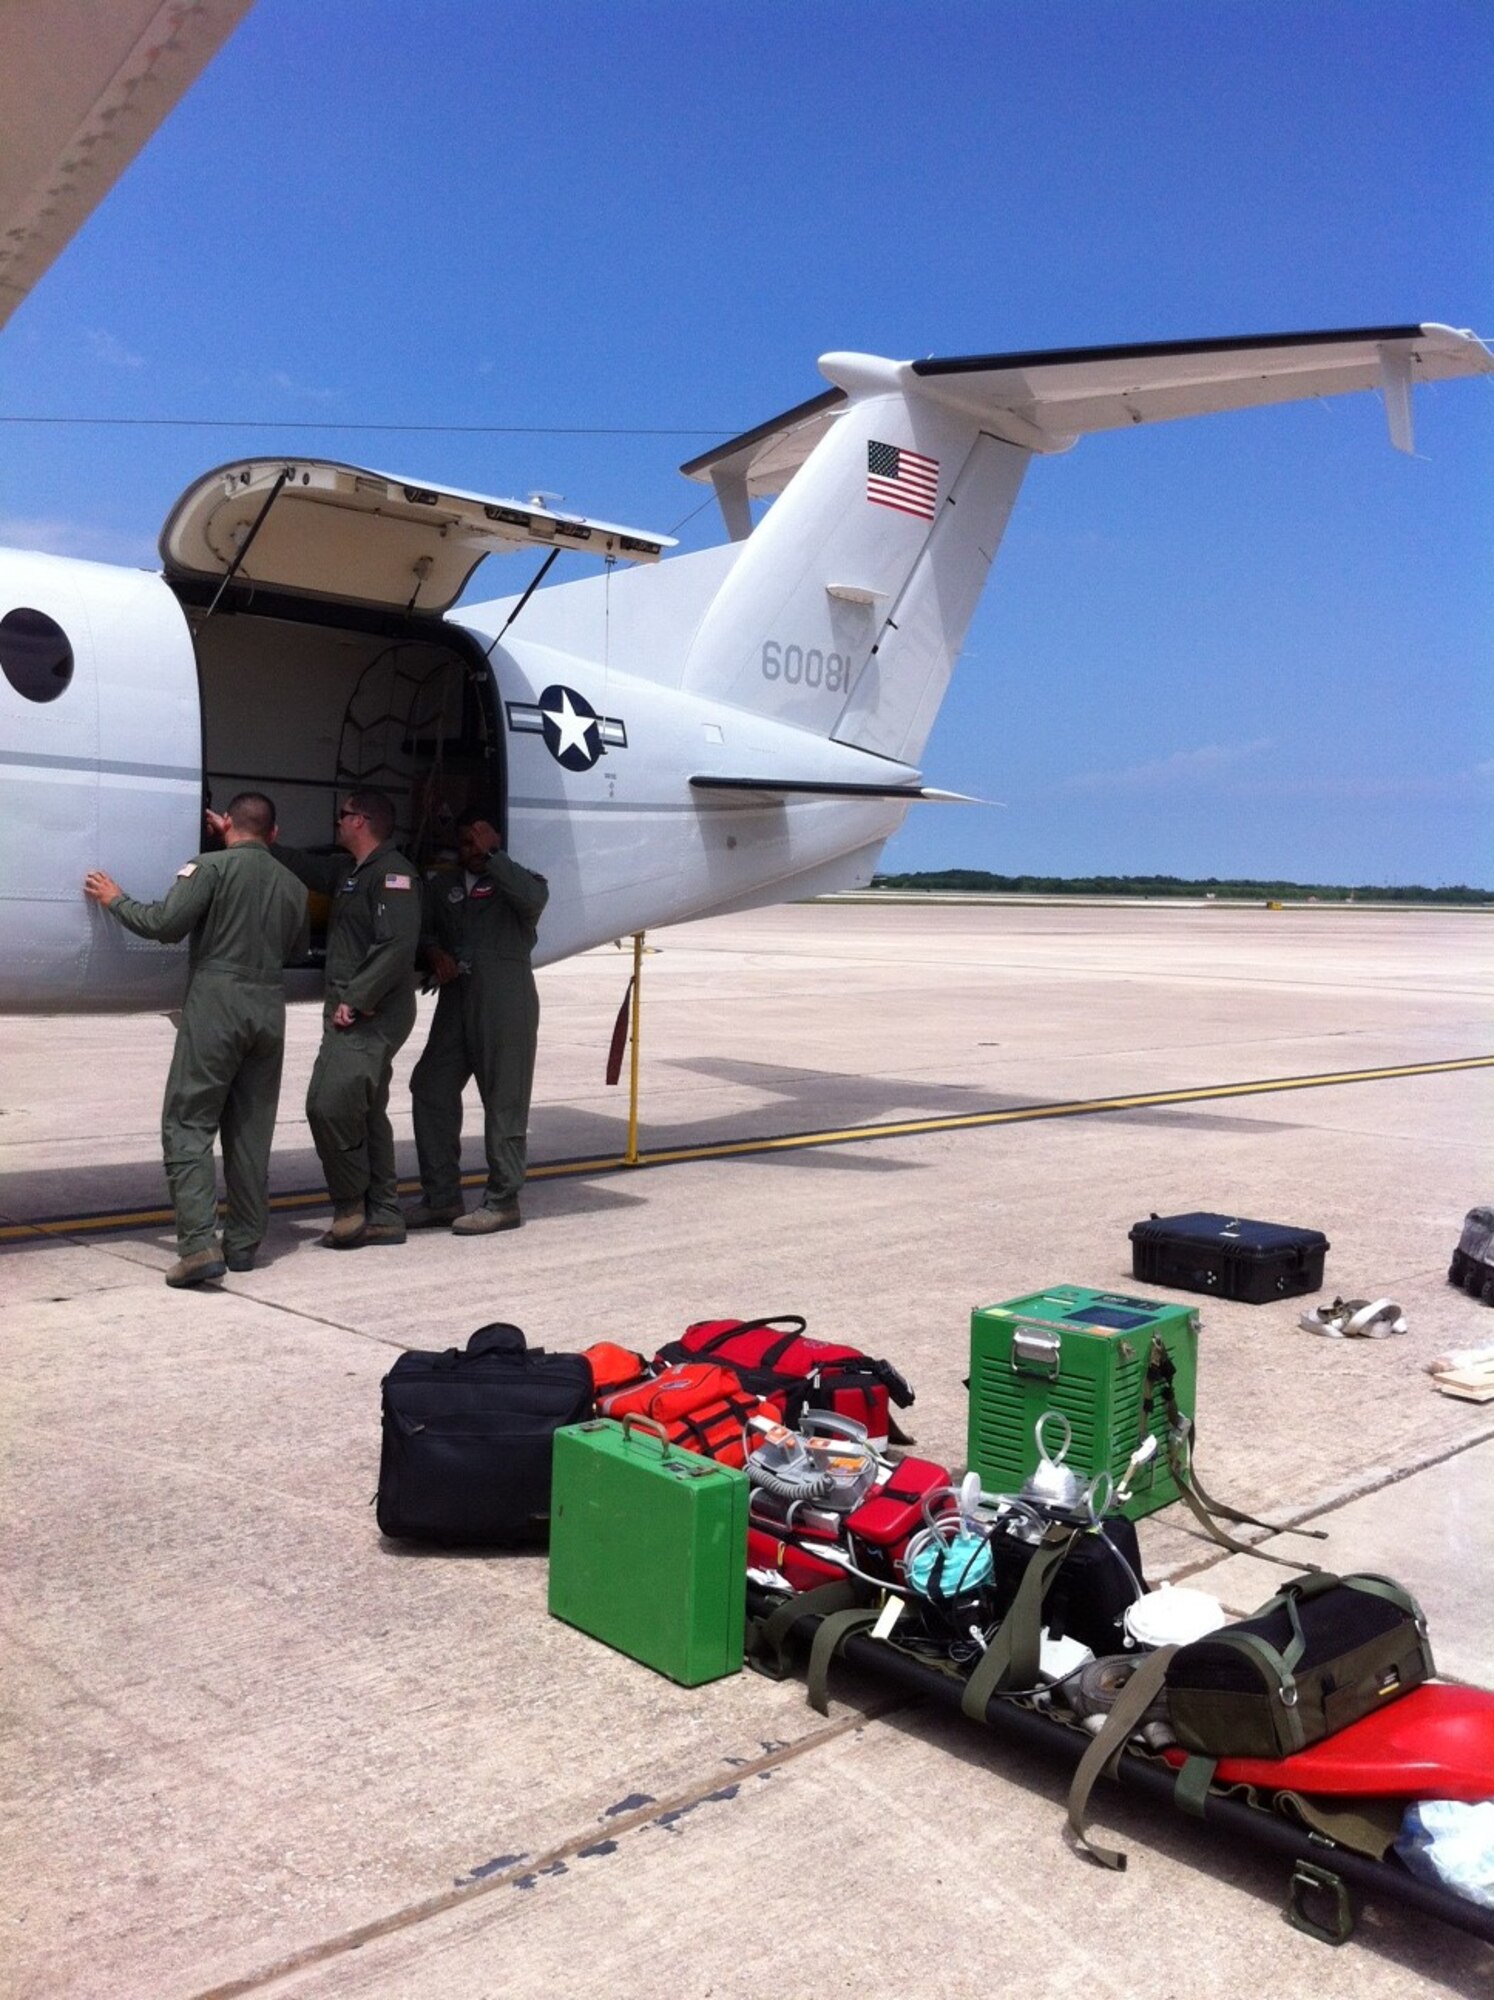 Airmen begin to fit a C-12 Huron aircraft with aeromedical evacuation equipment in order for the aircraft to be certified. After certification, the C-12 will be able to perform aeromedical evacuations in the Pacific region. (Courtesy photo)